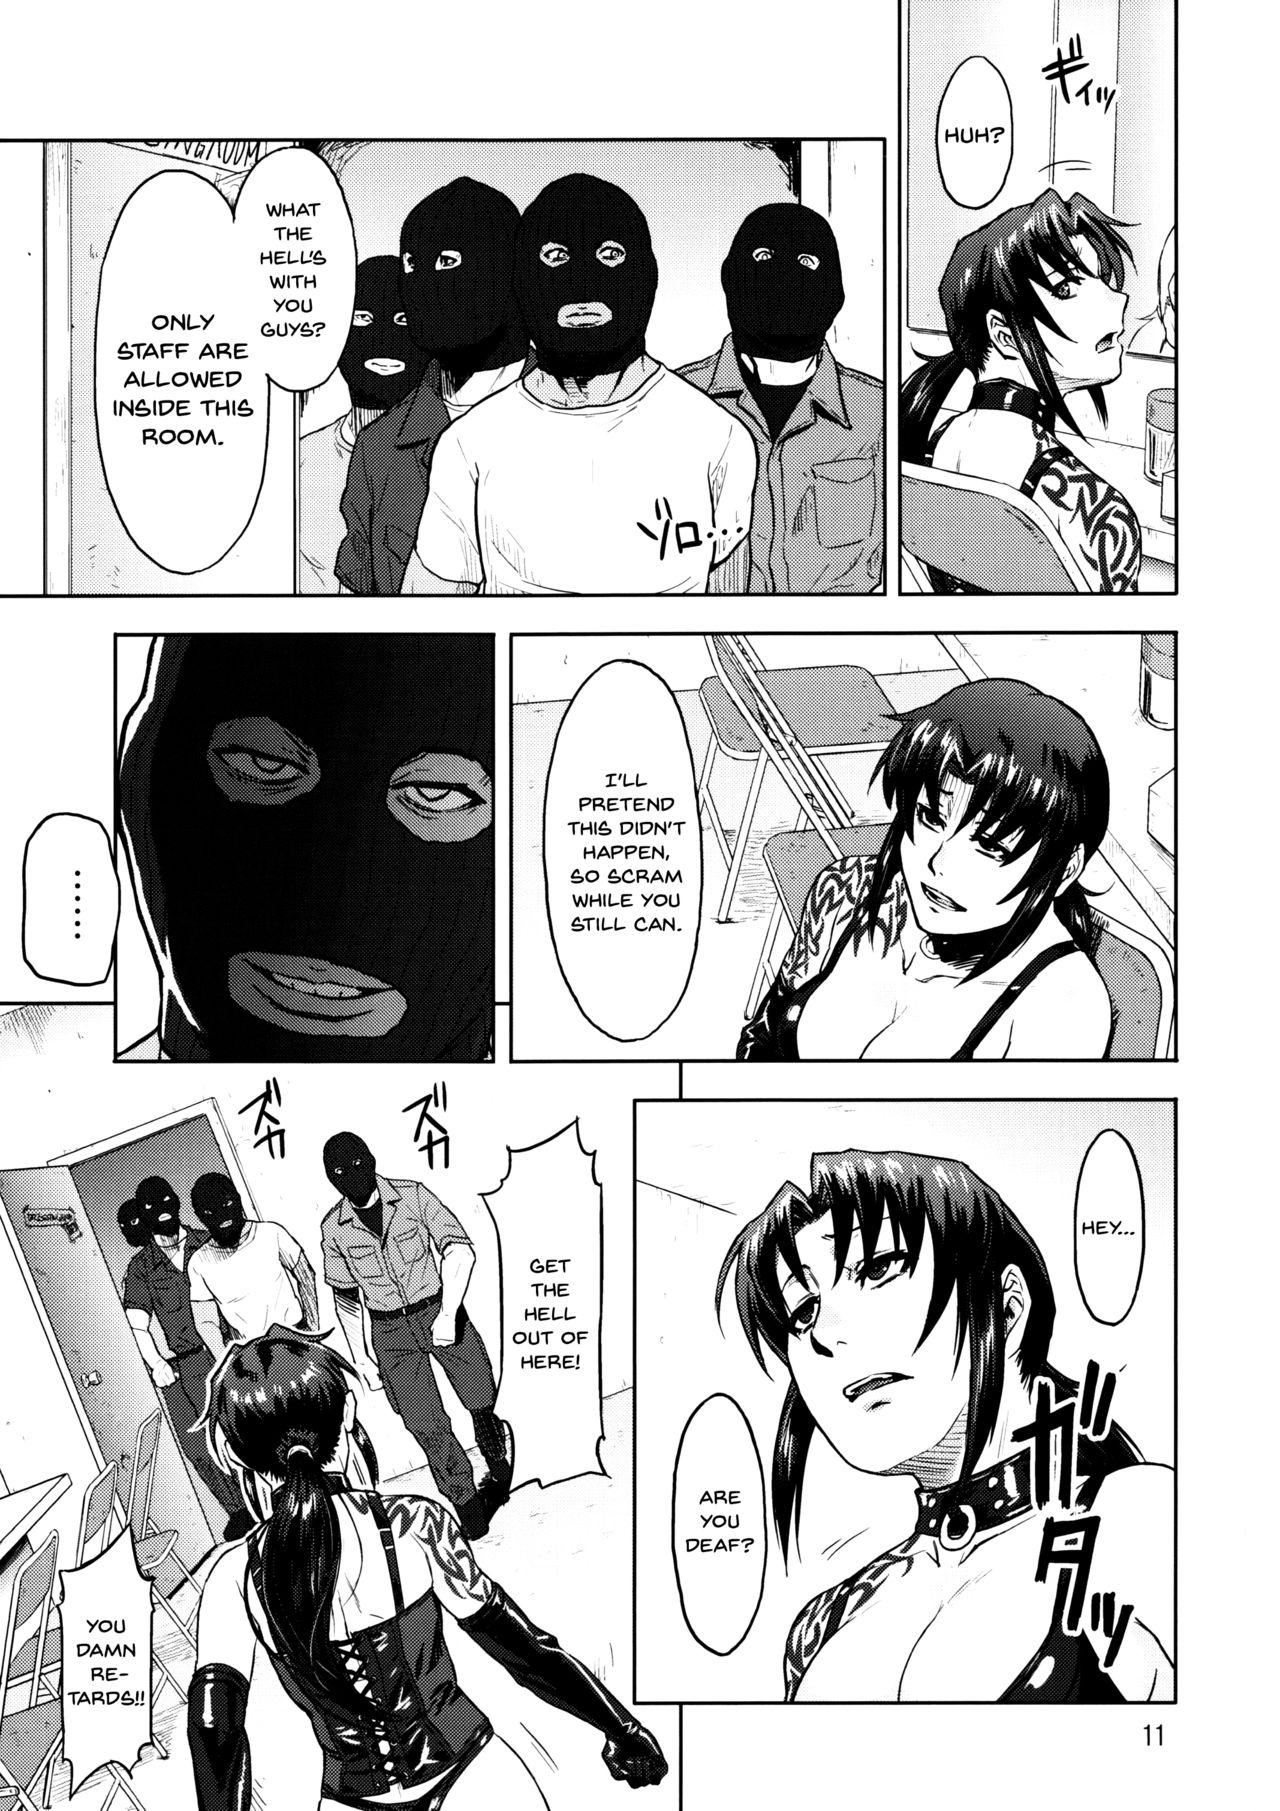 Speculum Dressing Room - Black lagoon Doll - Page 11